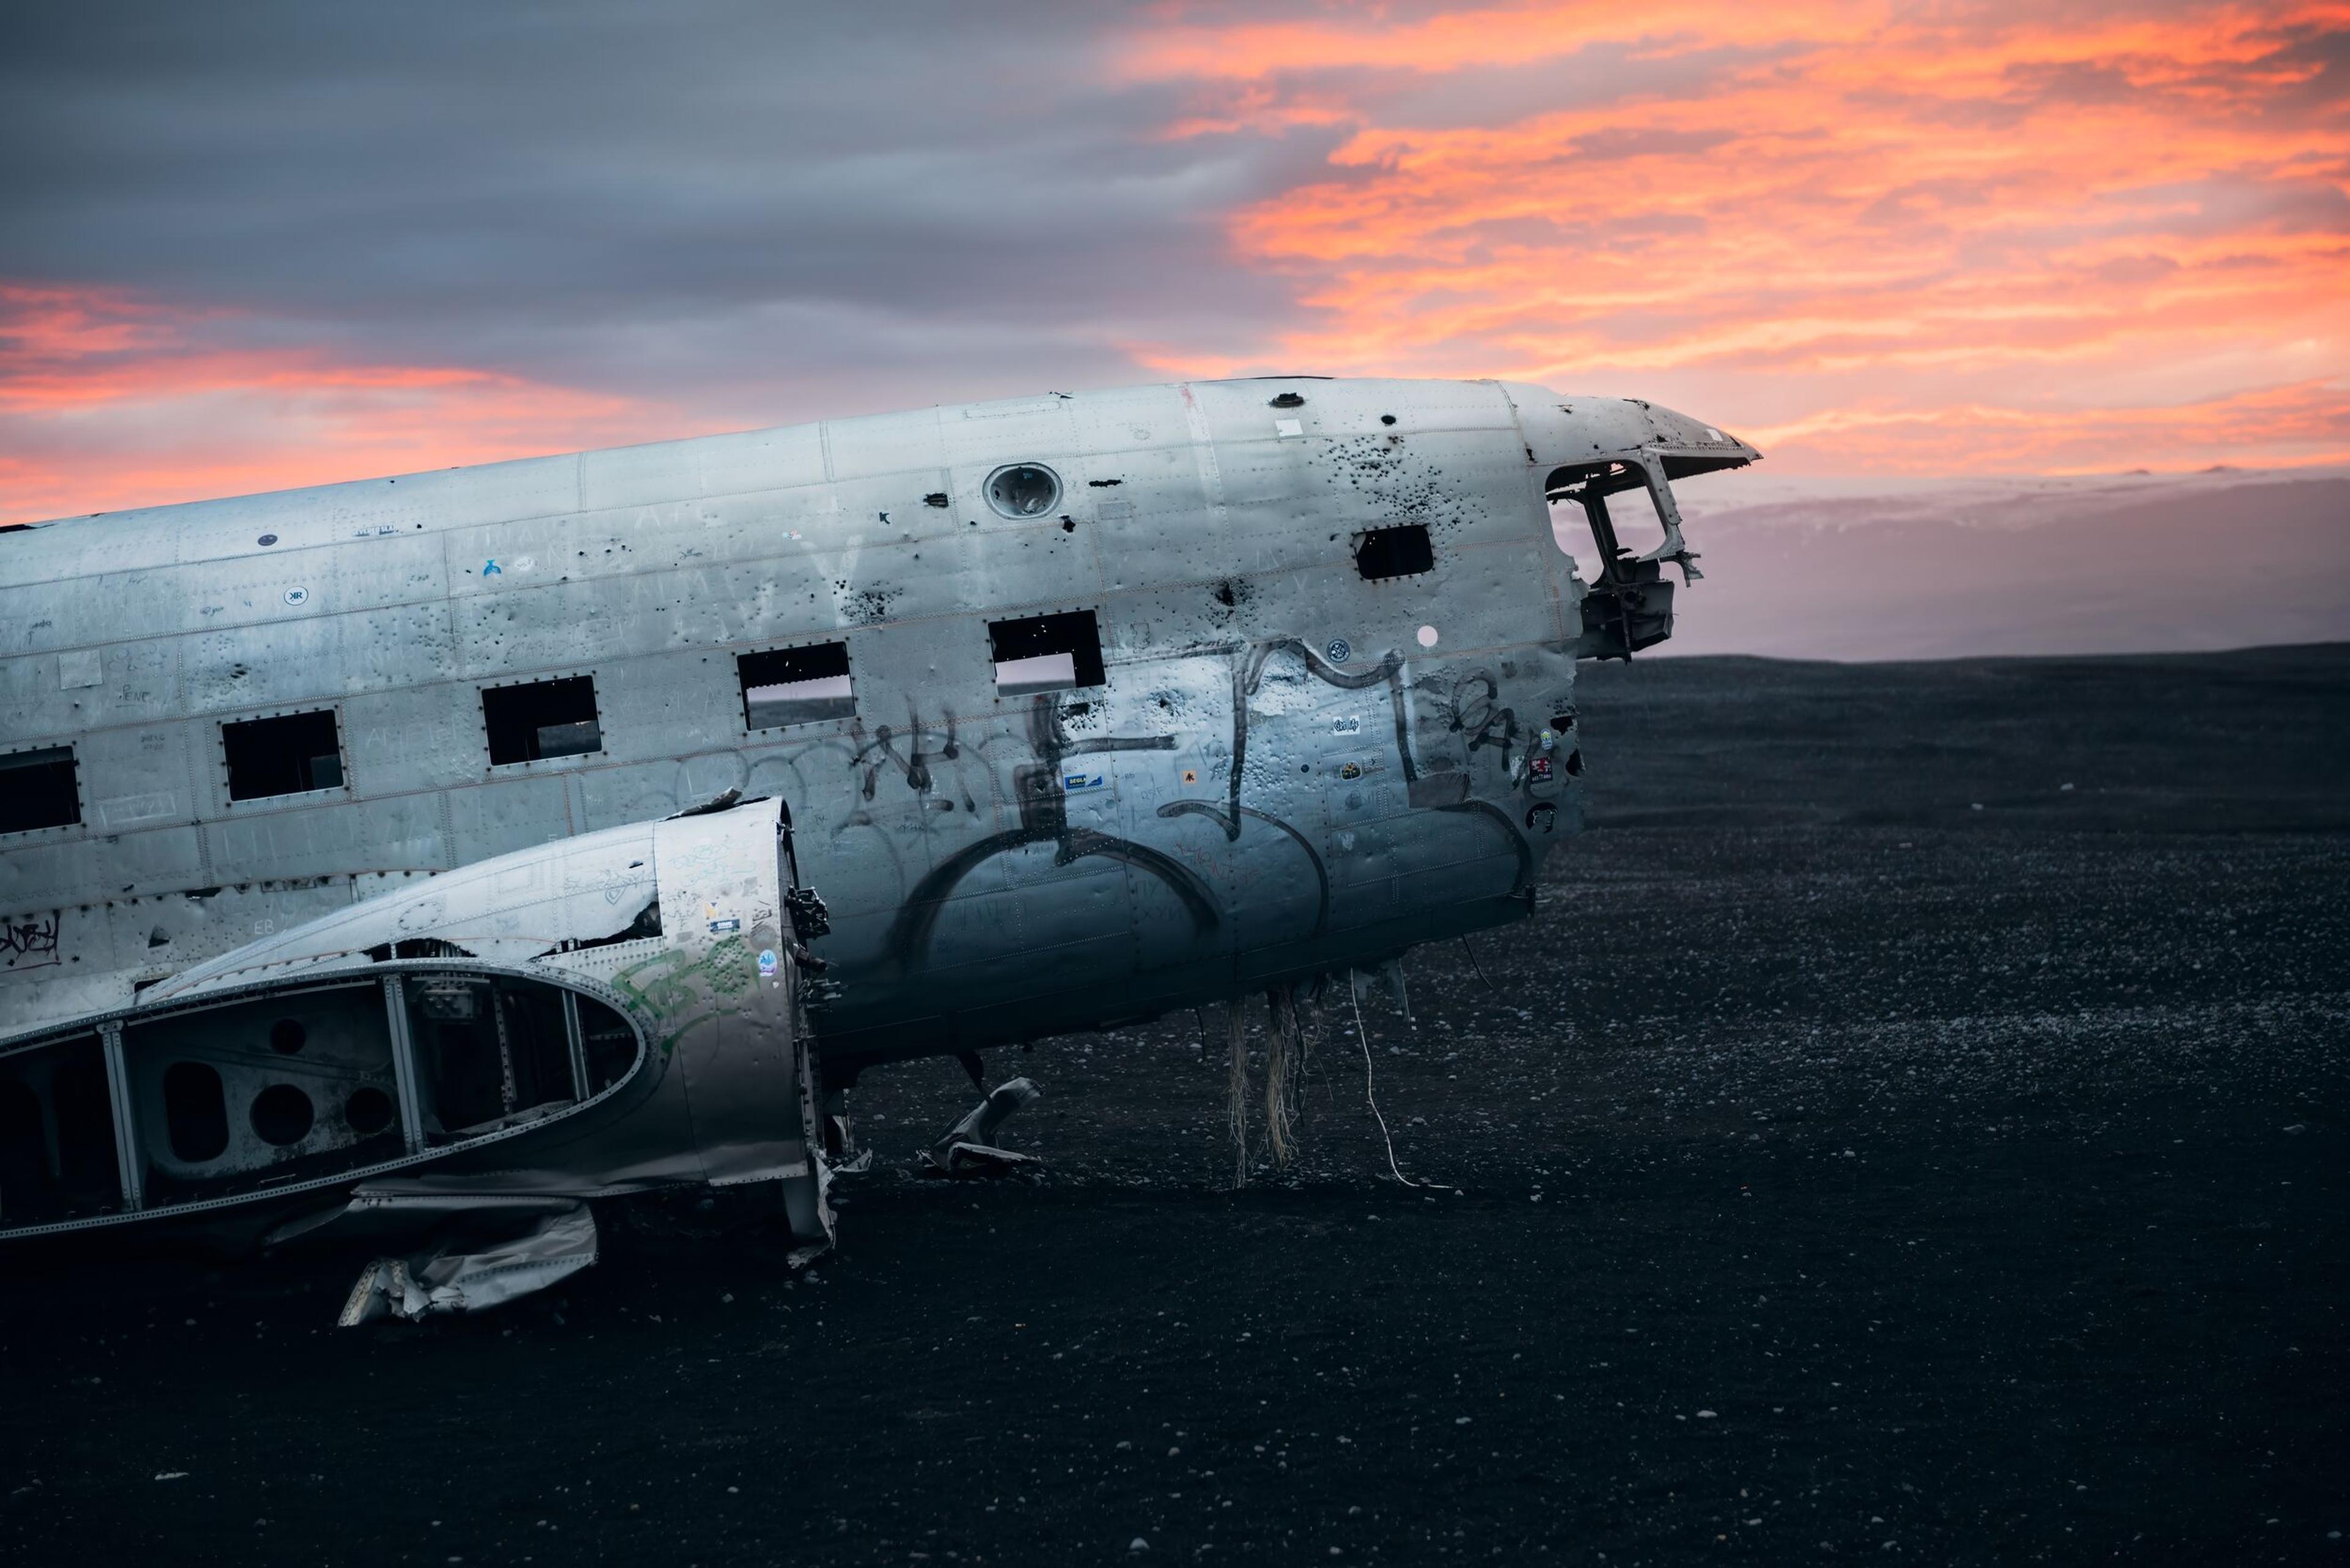 Abandoned plane wreckage in sunset 